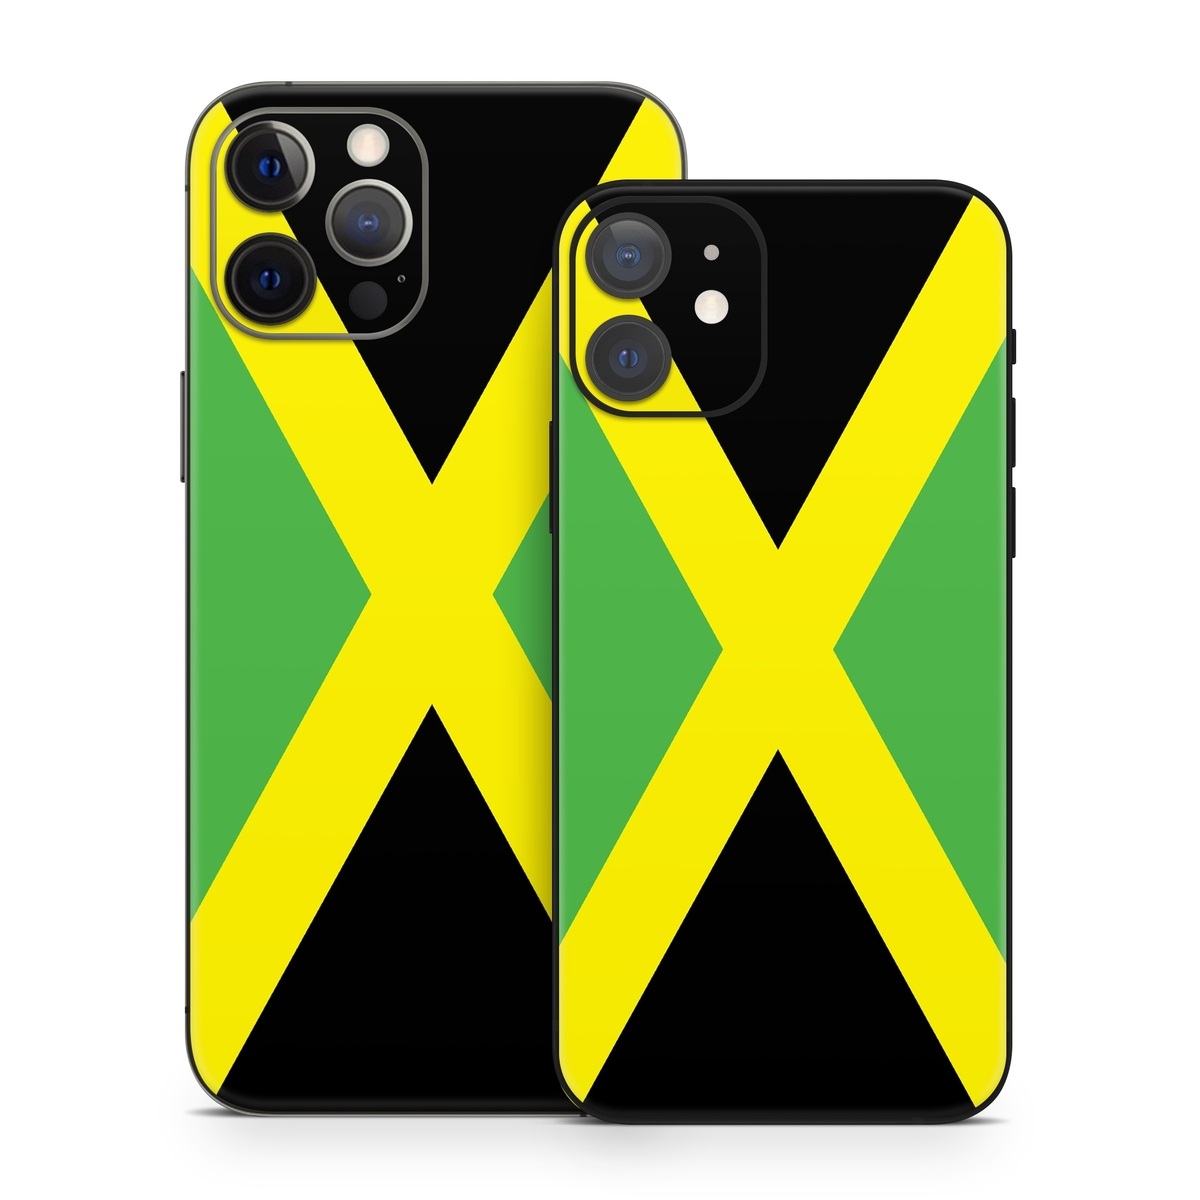 iPhone 12 Series Skin design of Green, Flag, Yellow, Macro photography, Graphics, Graphic design, with black, green, yellow colors